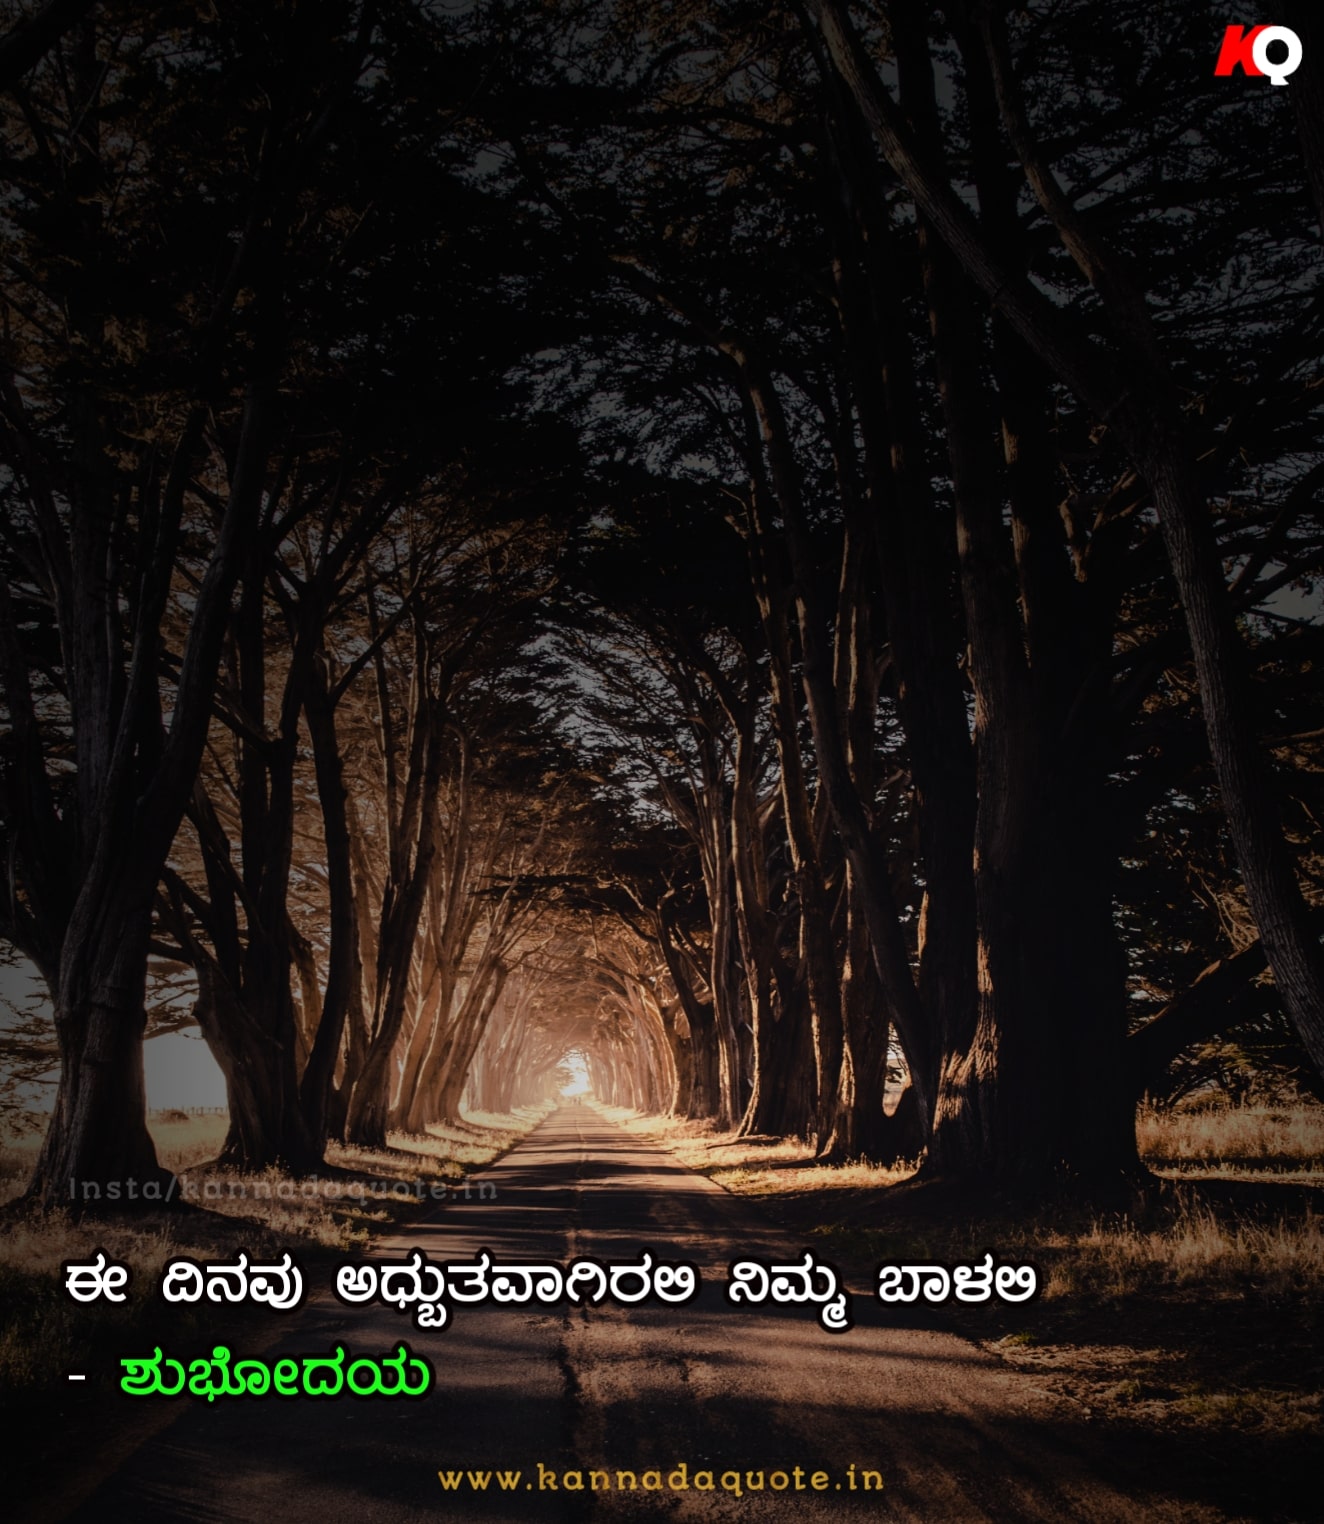 Good morning images in Kannada for WhatsApp